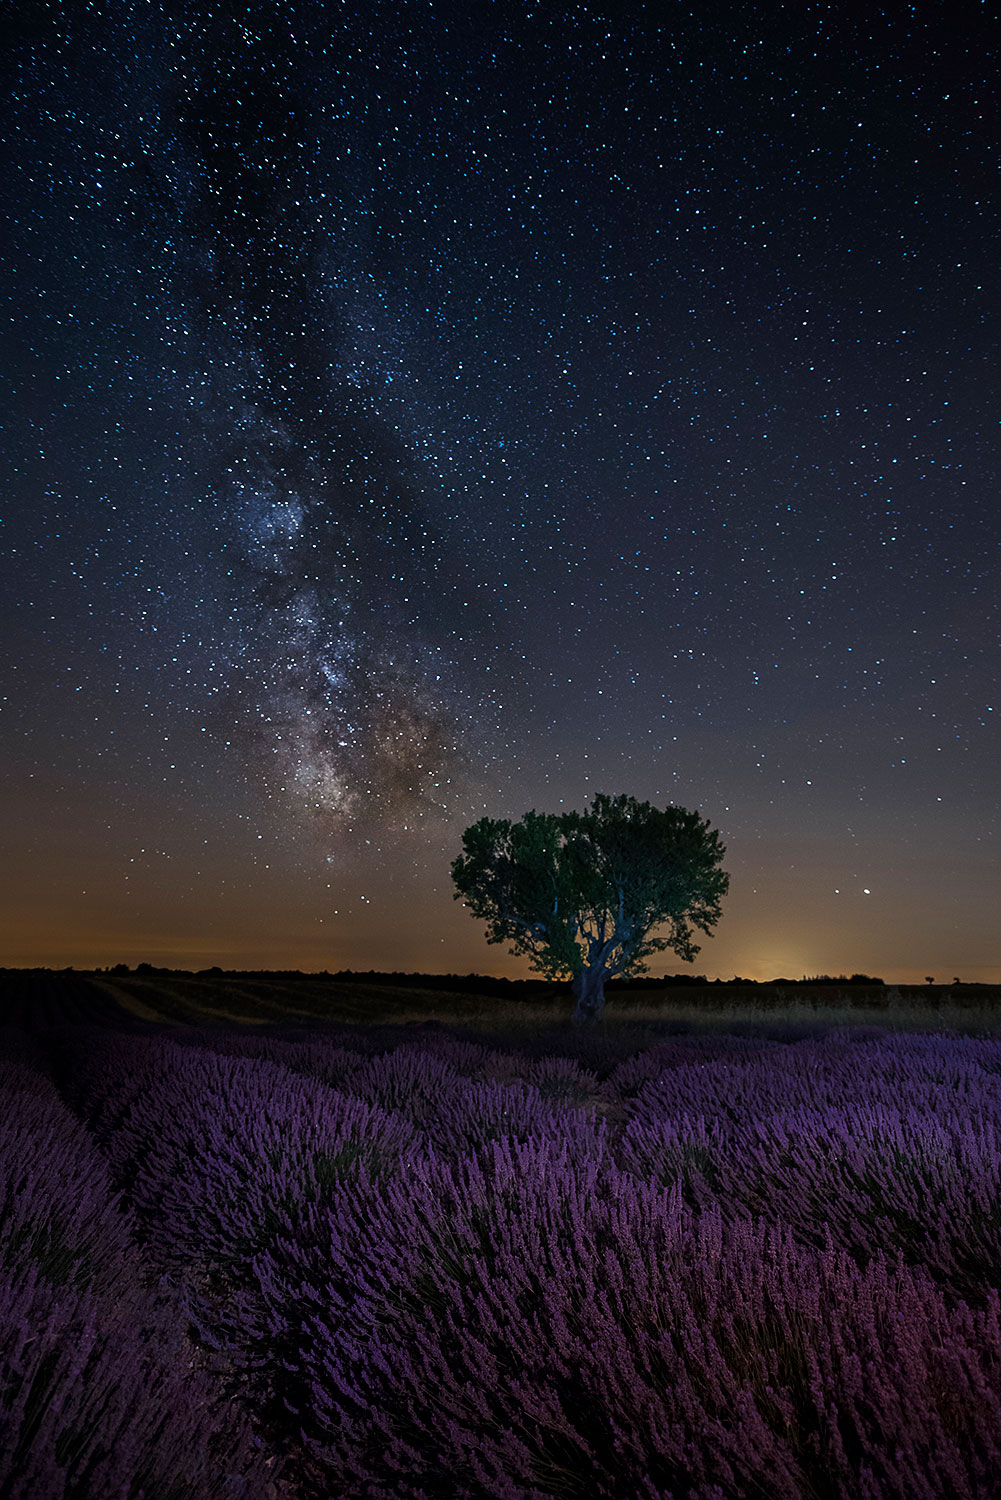 The Milky Way Over Lavender...